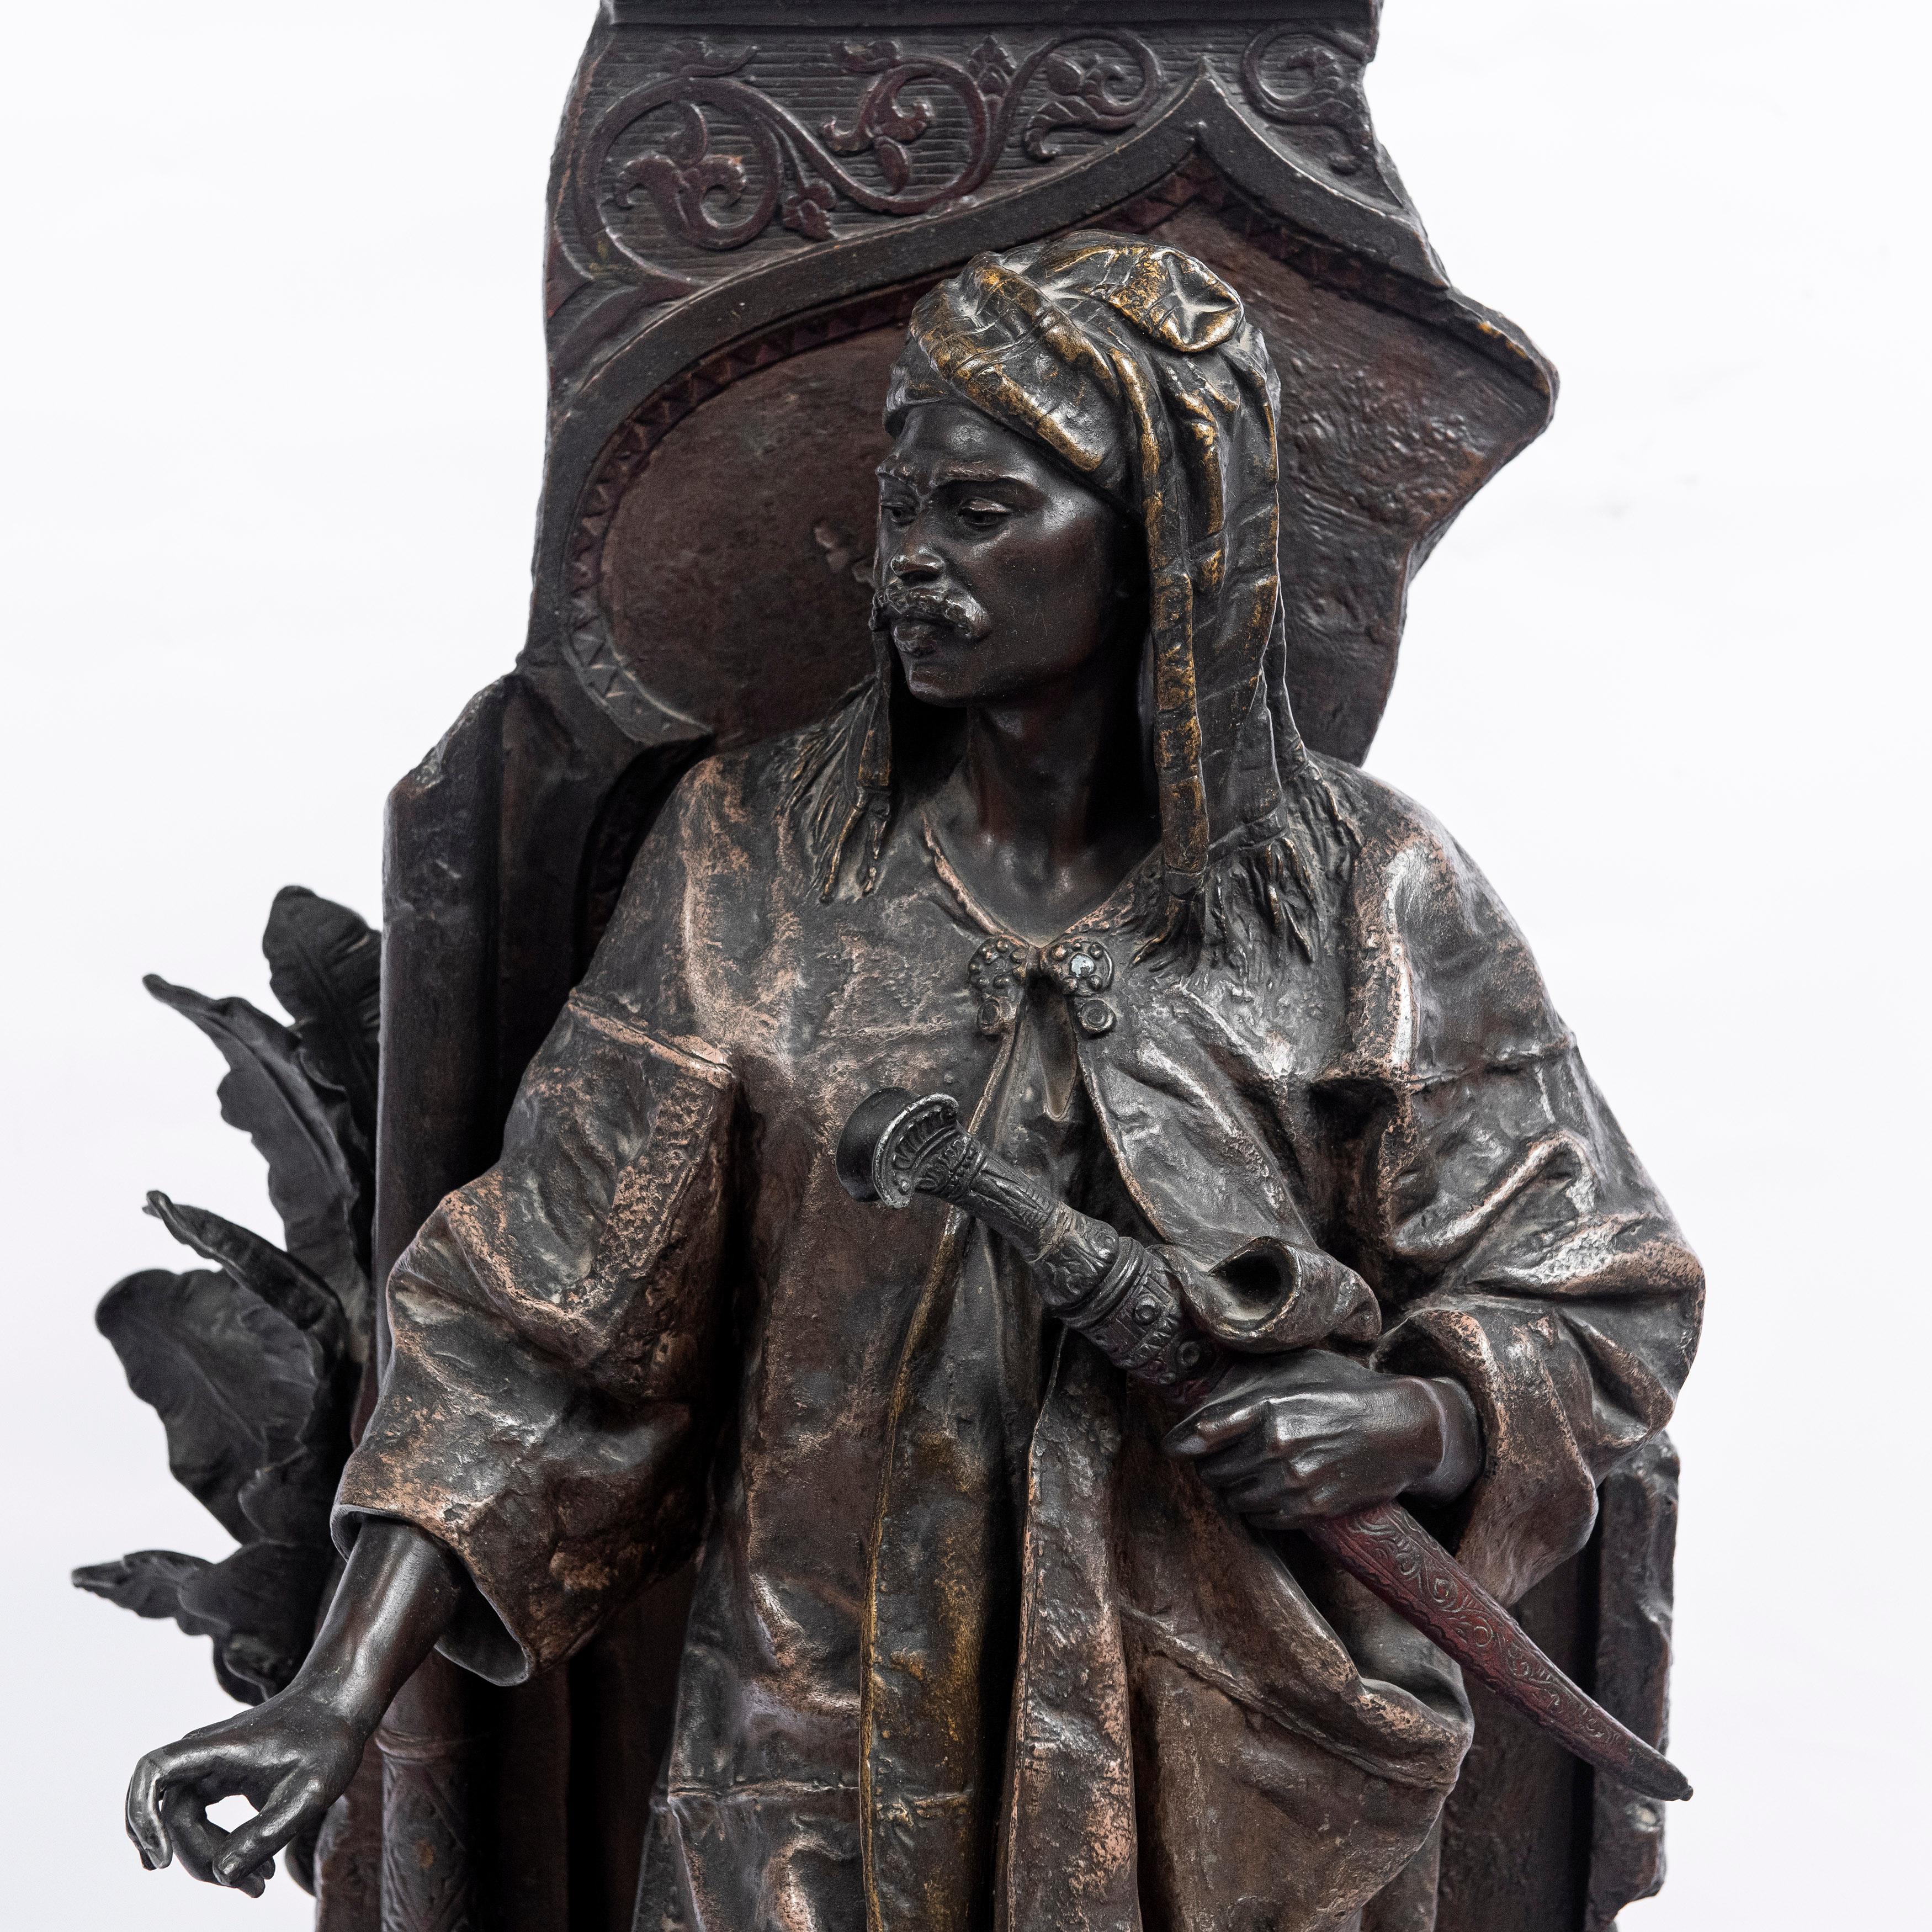 Bronze alloy sculpture. Signed E. Blot, France, late 19th century.
Orientalist style.
Attributed to Anatole-Jean Guillot (1865-1911).